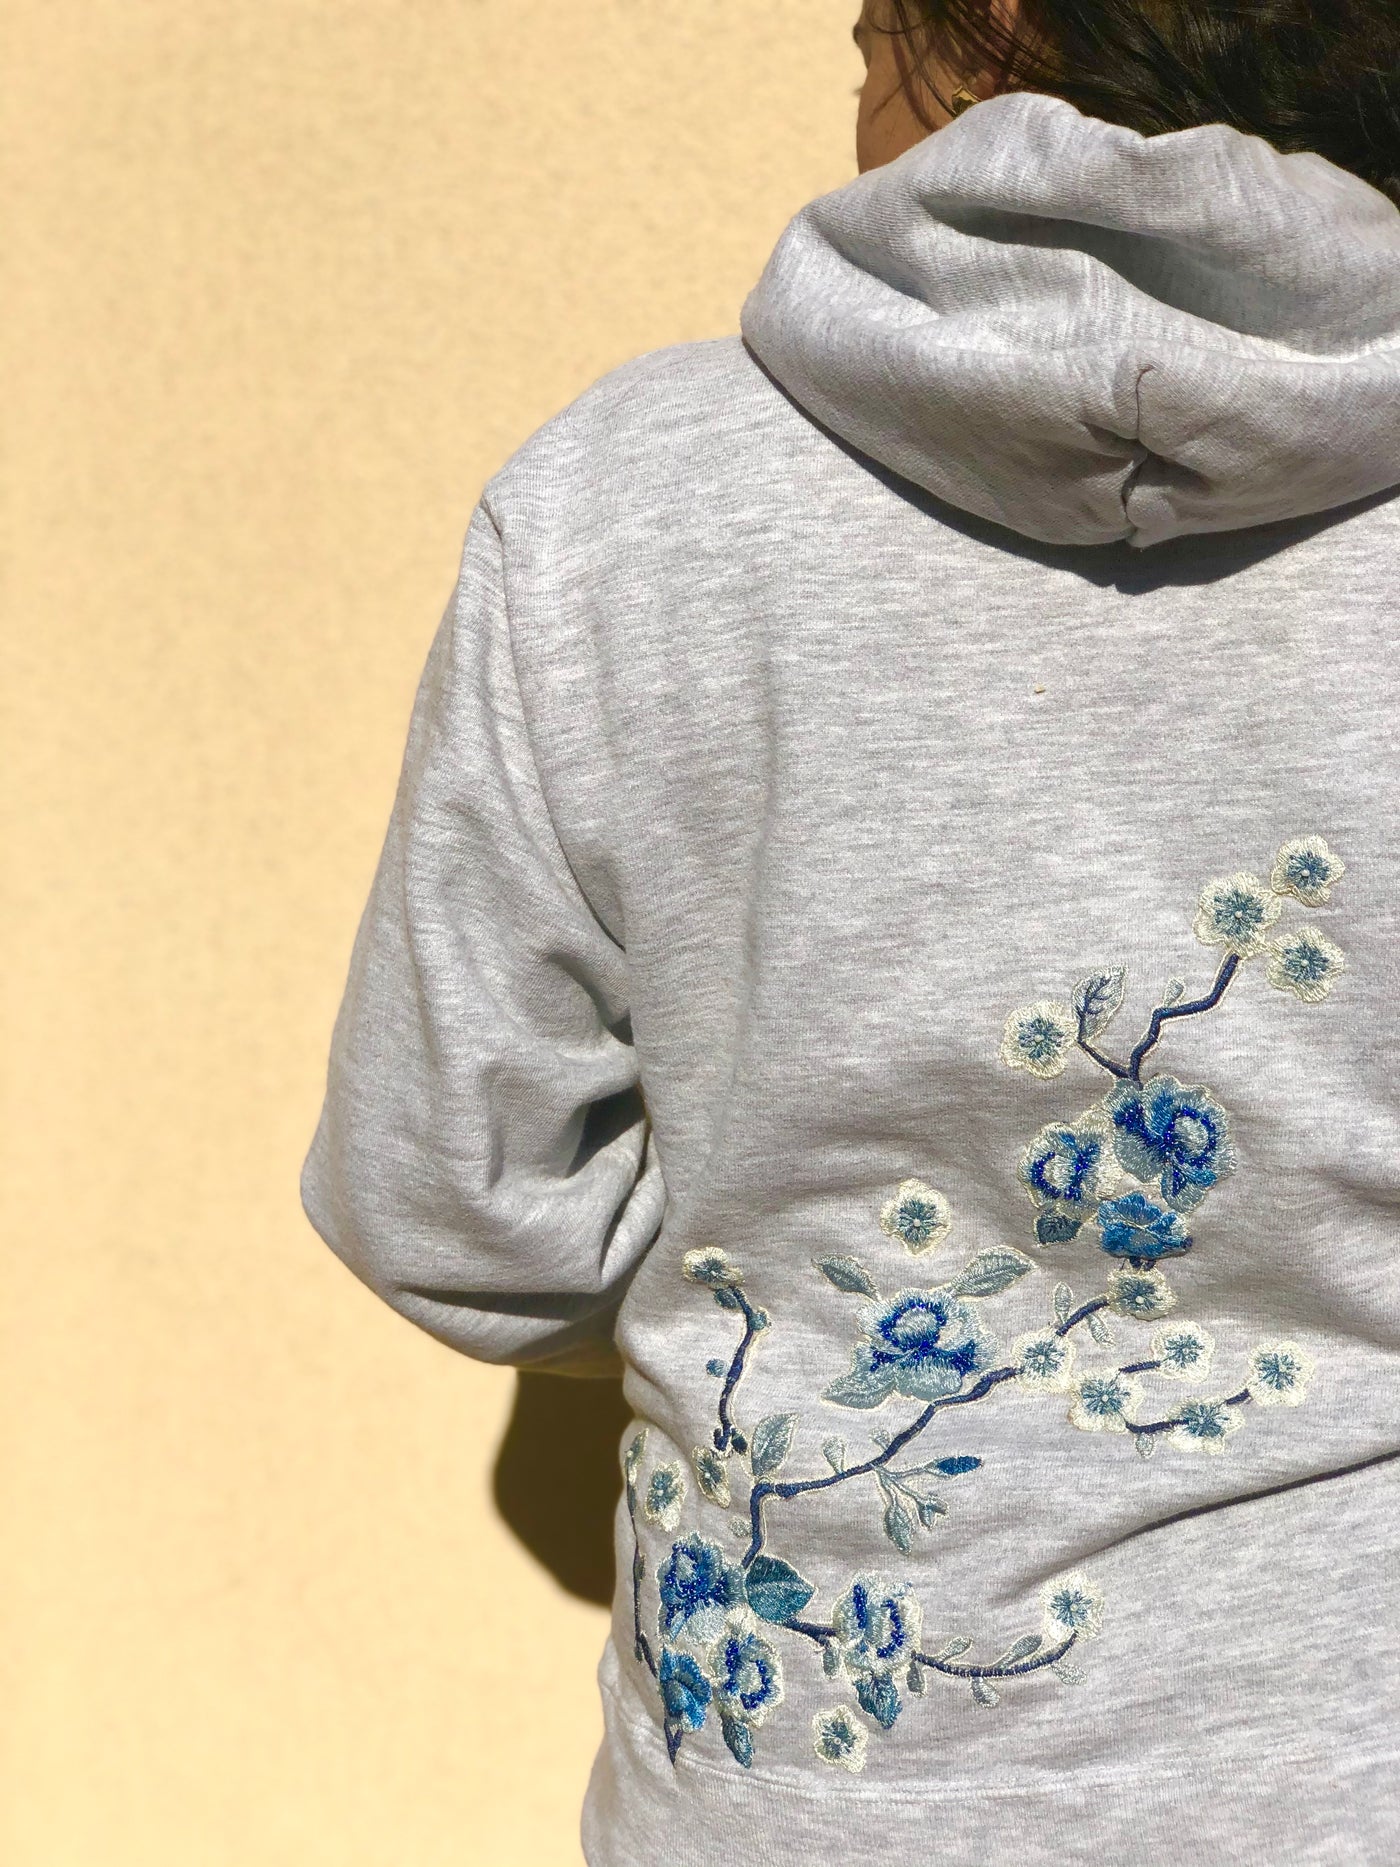 Upcycled Champion hoodie embroidered meticulously in shades of blue on the back